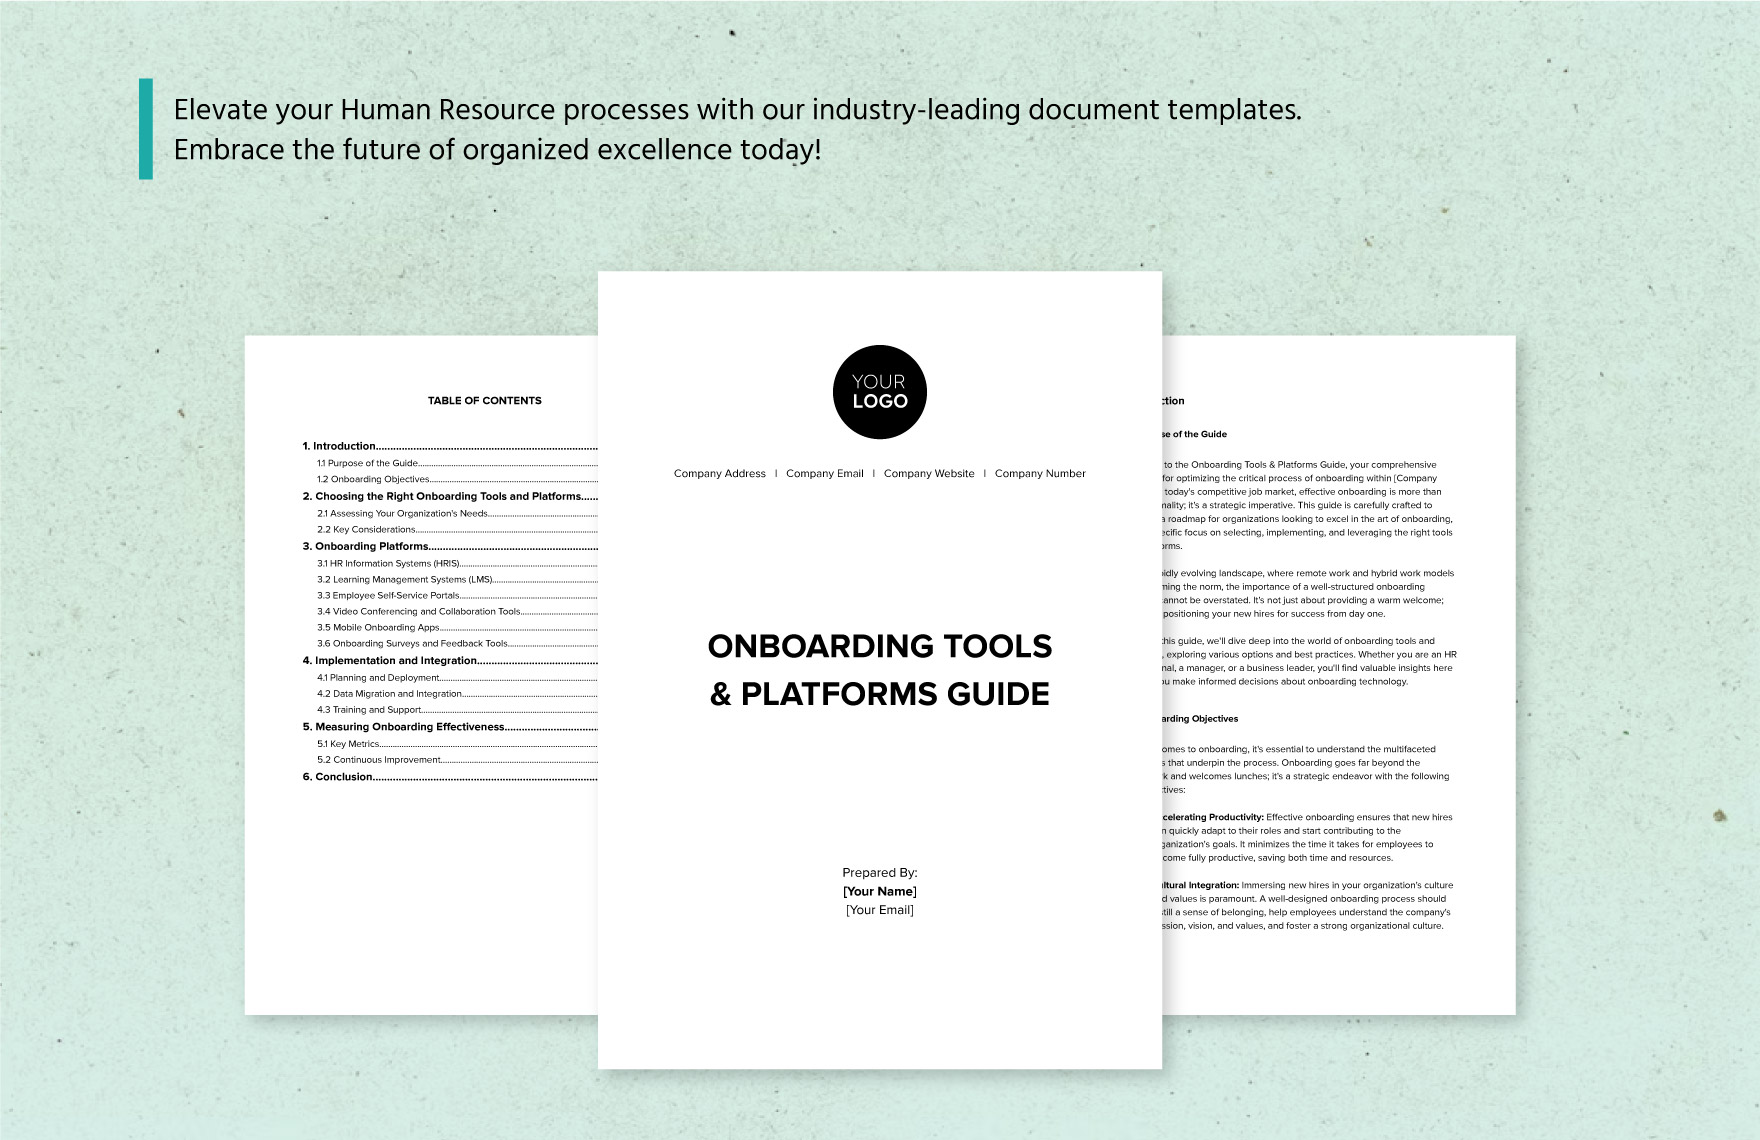 Onboarding Tools & Platforms Guide HR Template